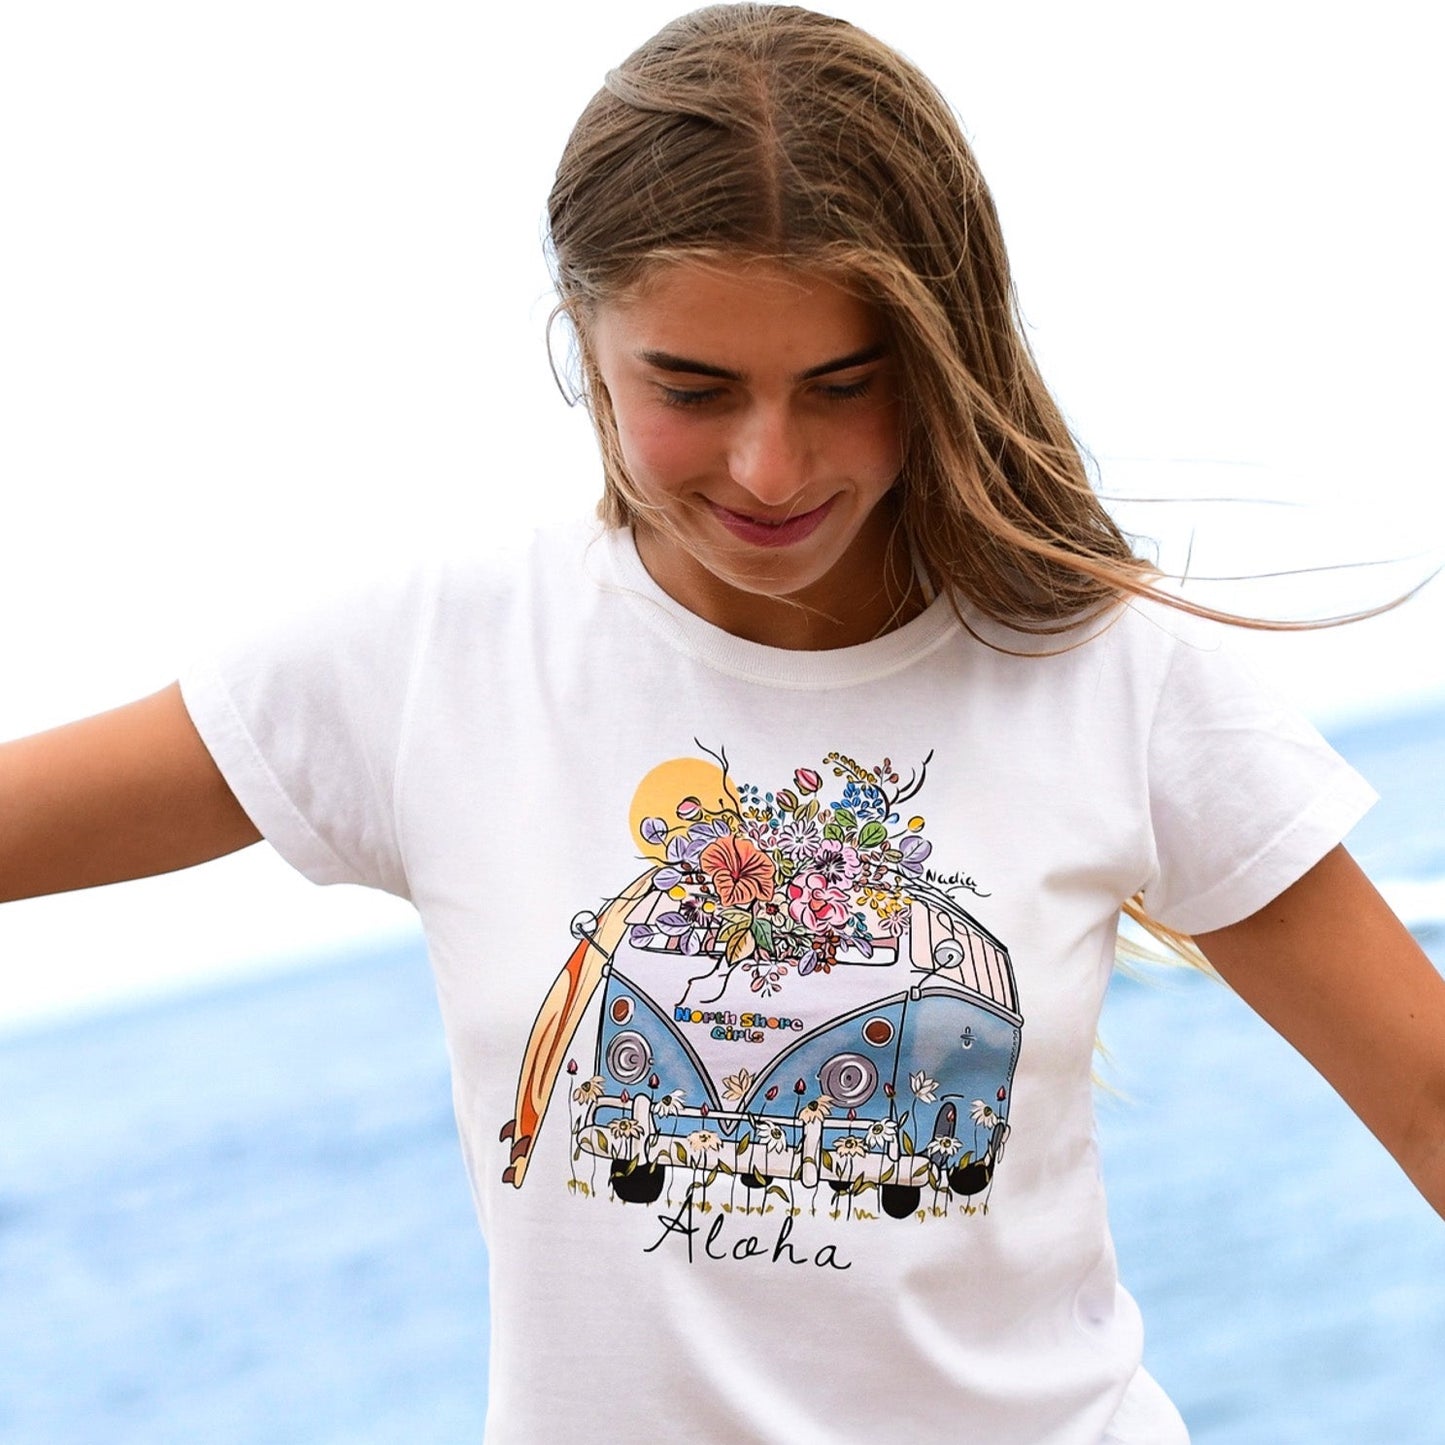 North Shore Girls NSG surf bus illustrated graphic tee for women. floral surf design with surf board graphic